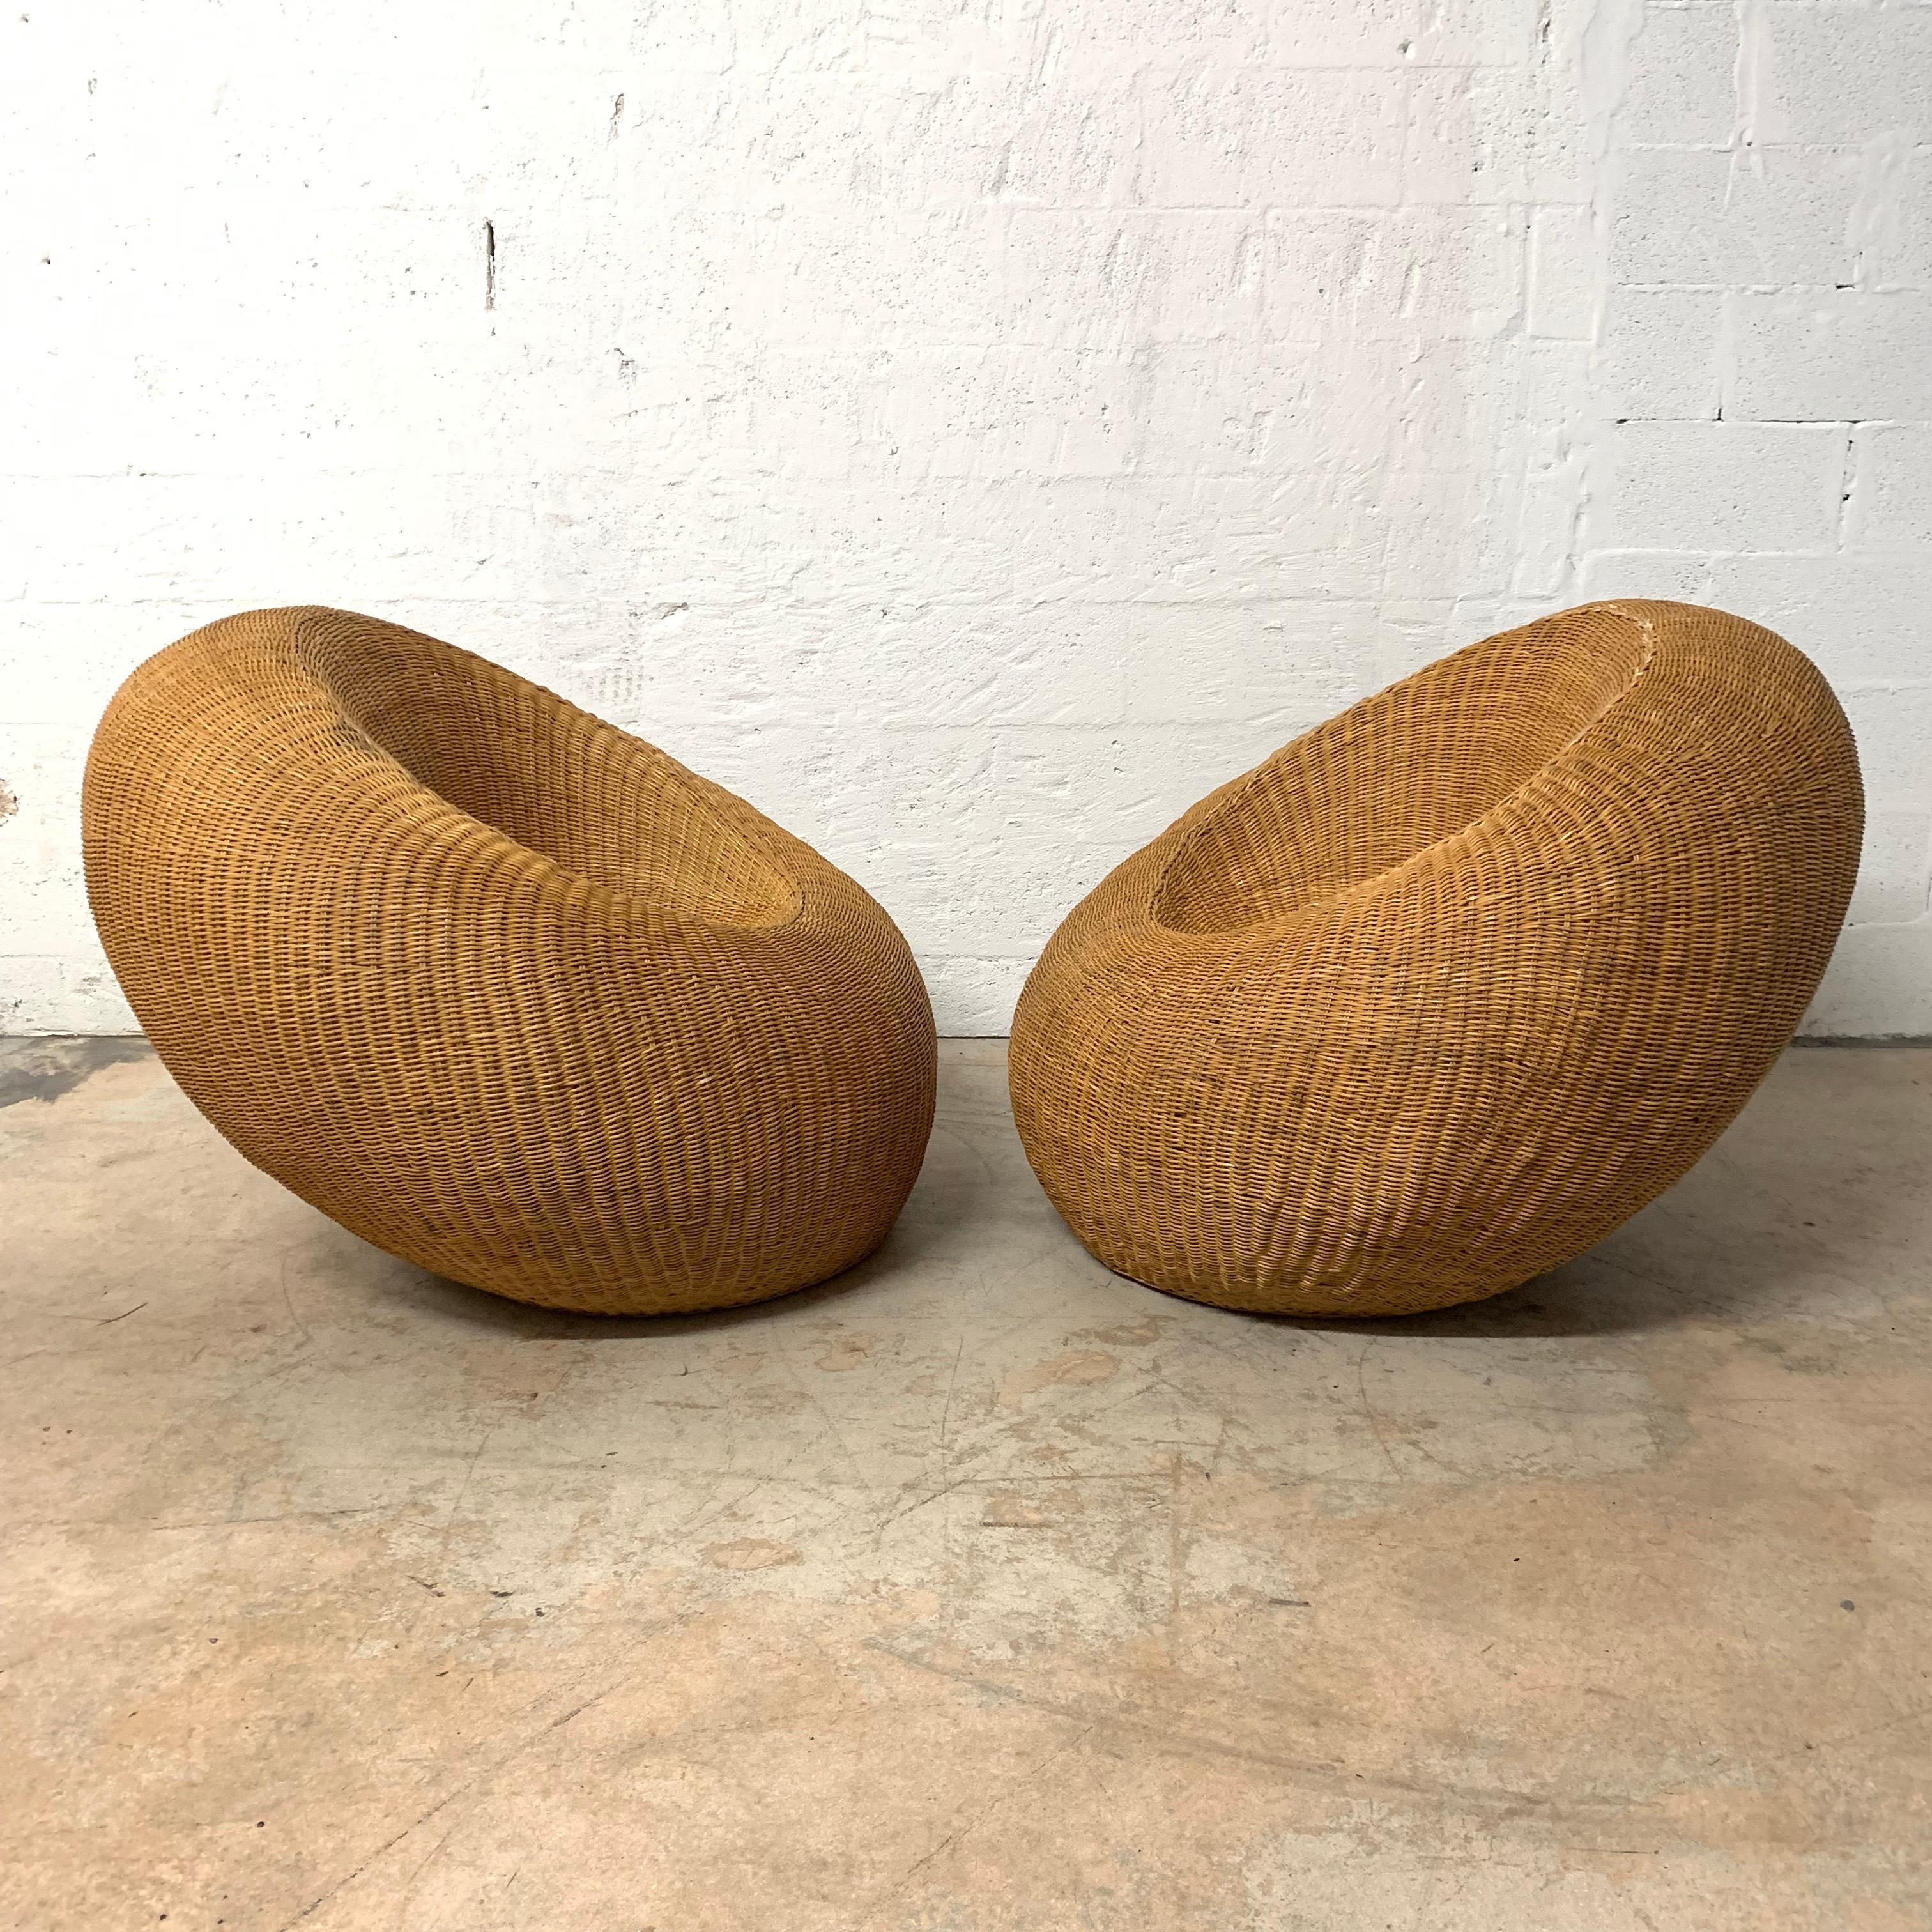 Pair of pod chairs rendered in bent rattan and wicker by Isamu Kenmochi for Yamakawa Rattan of Japan, 1960s.